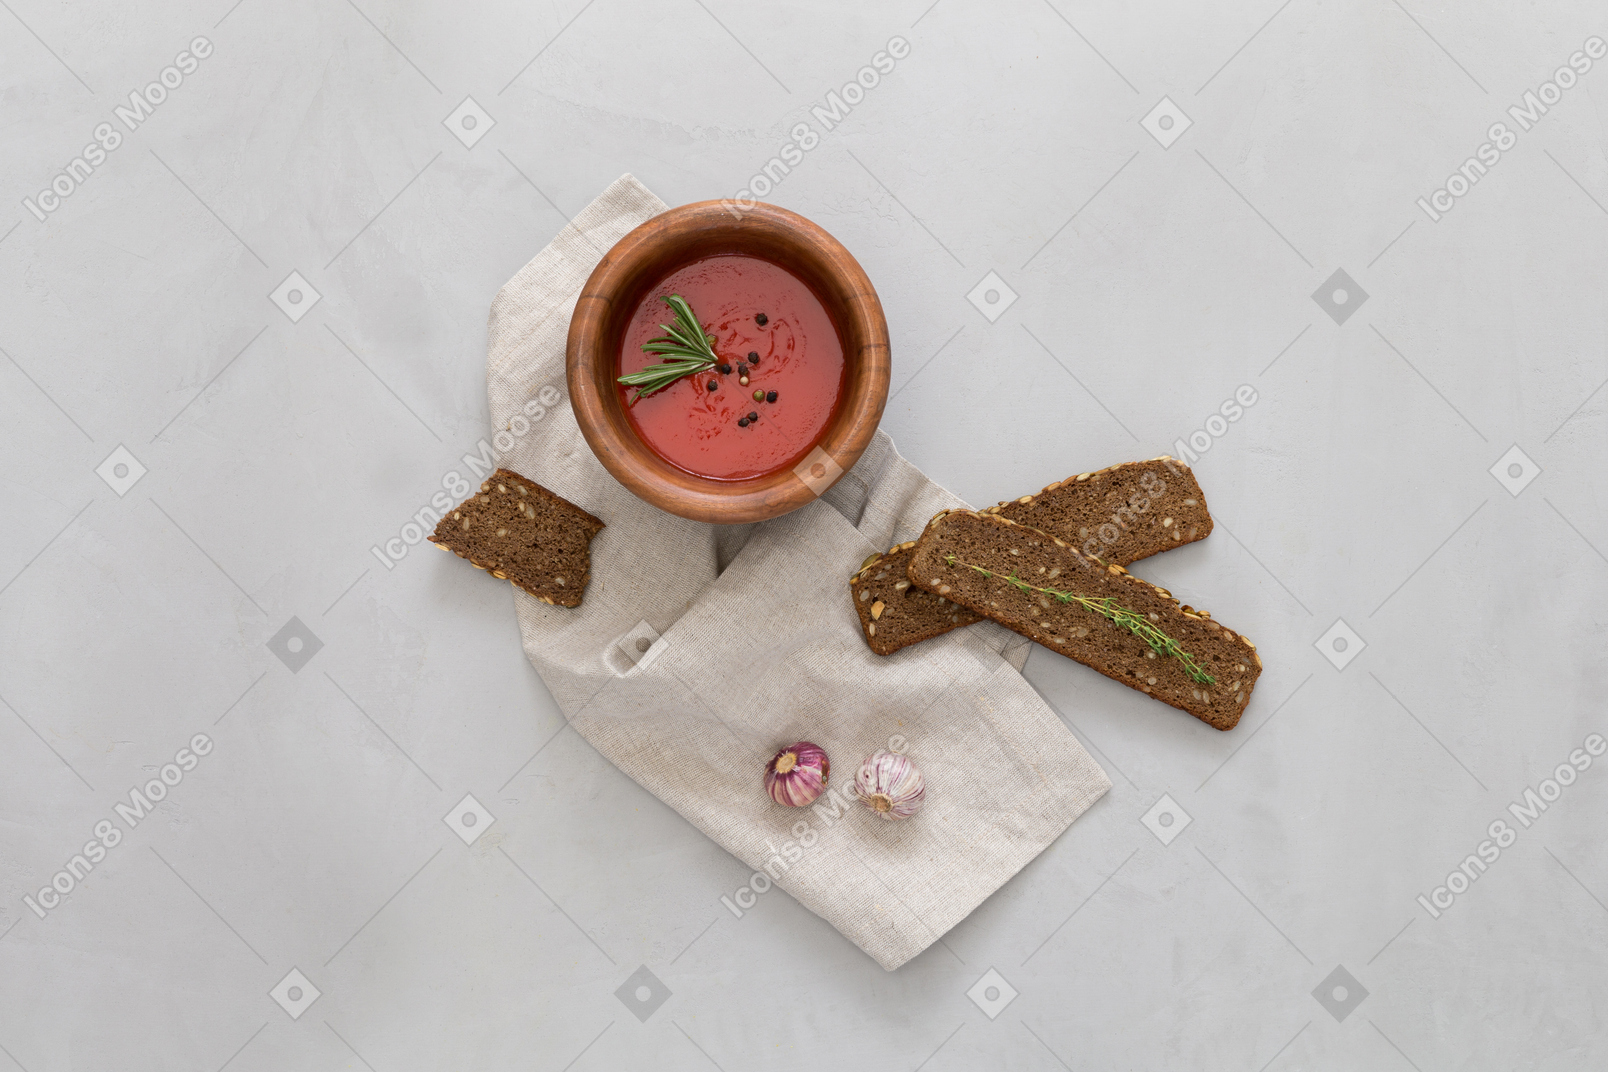 Some tomato sauce, brown bread and garlic